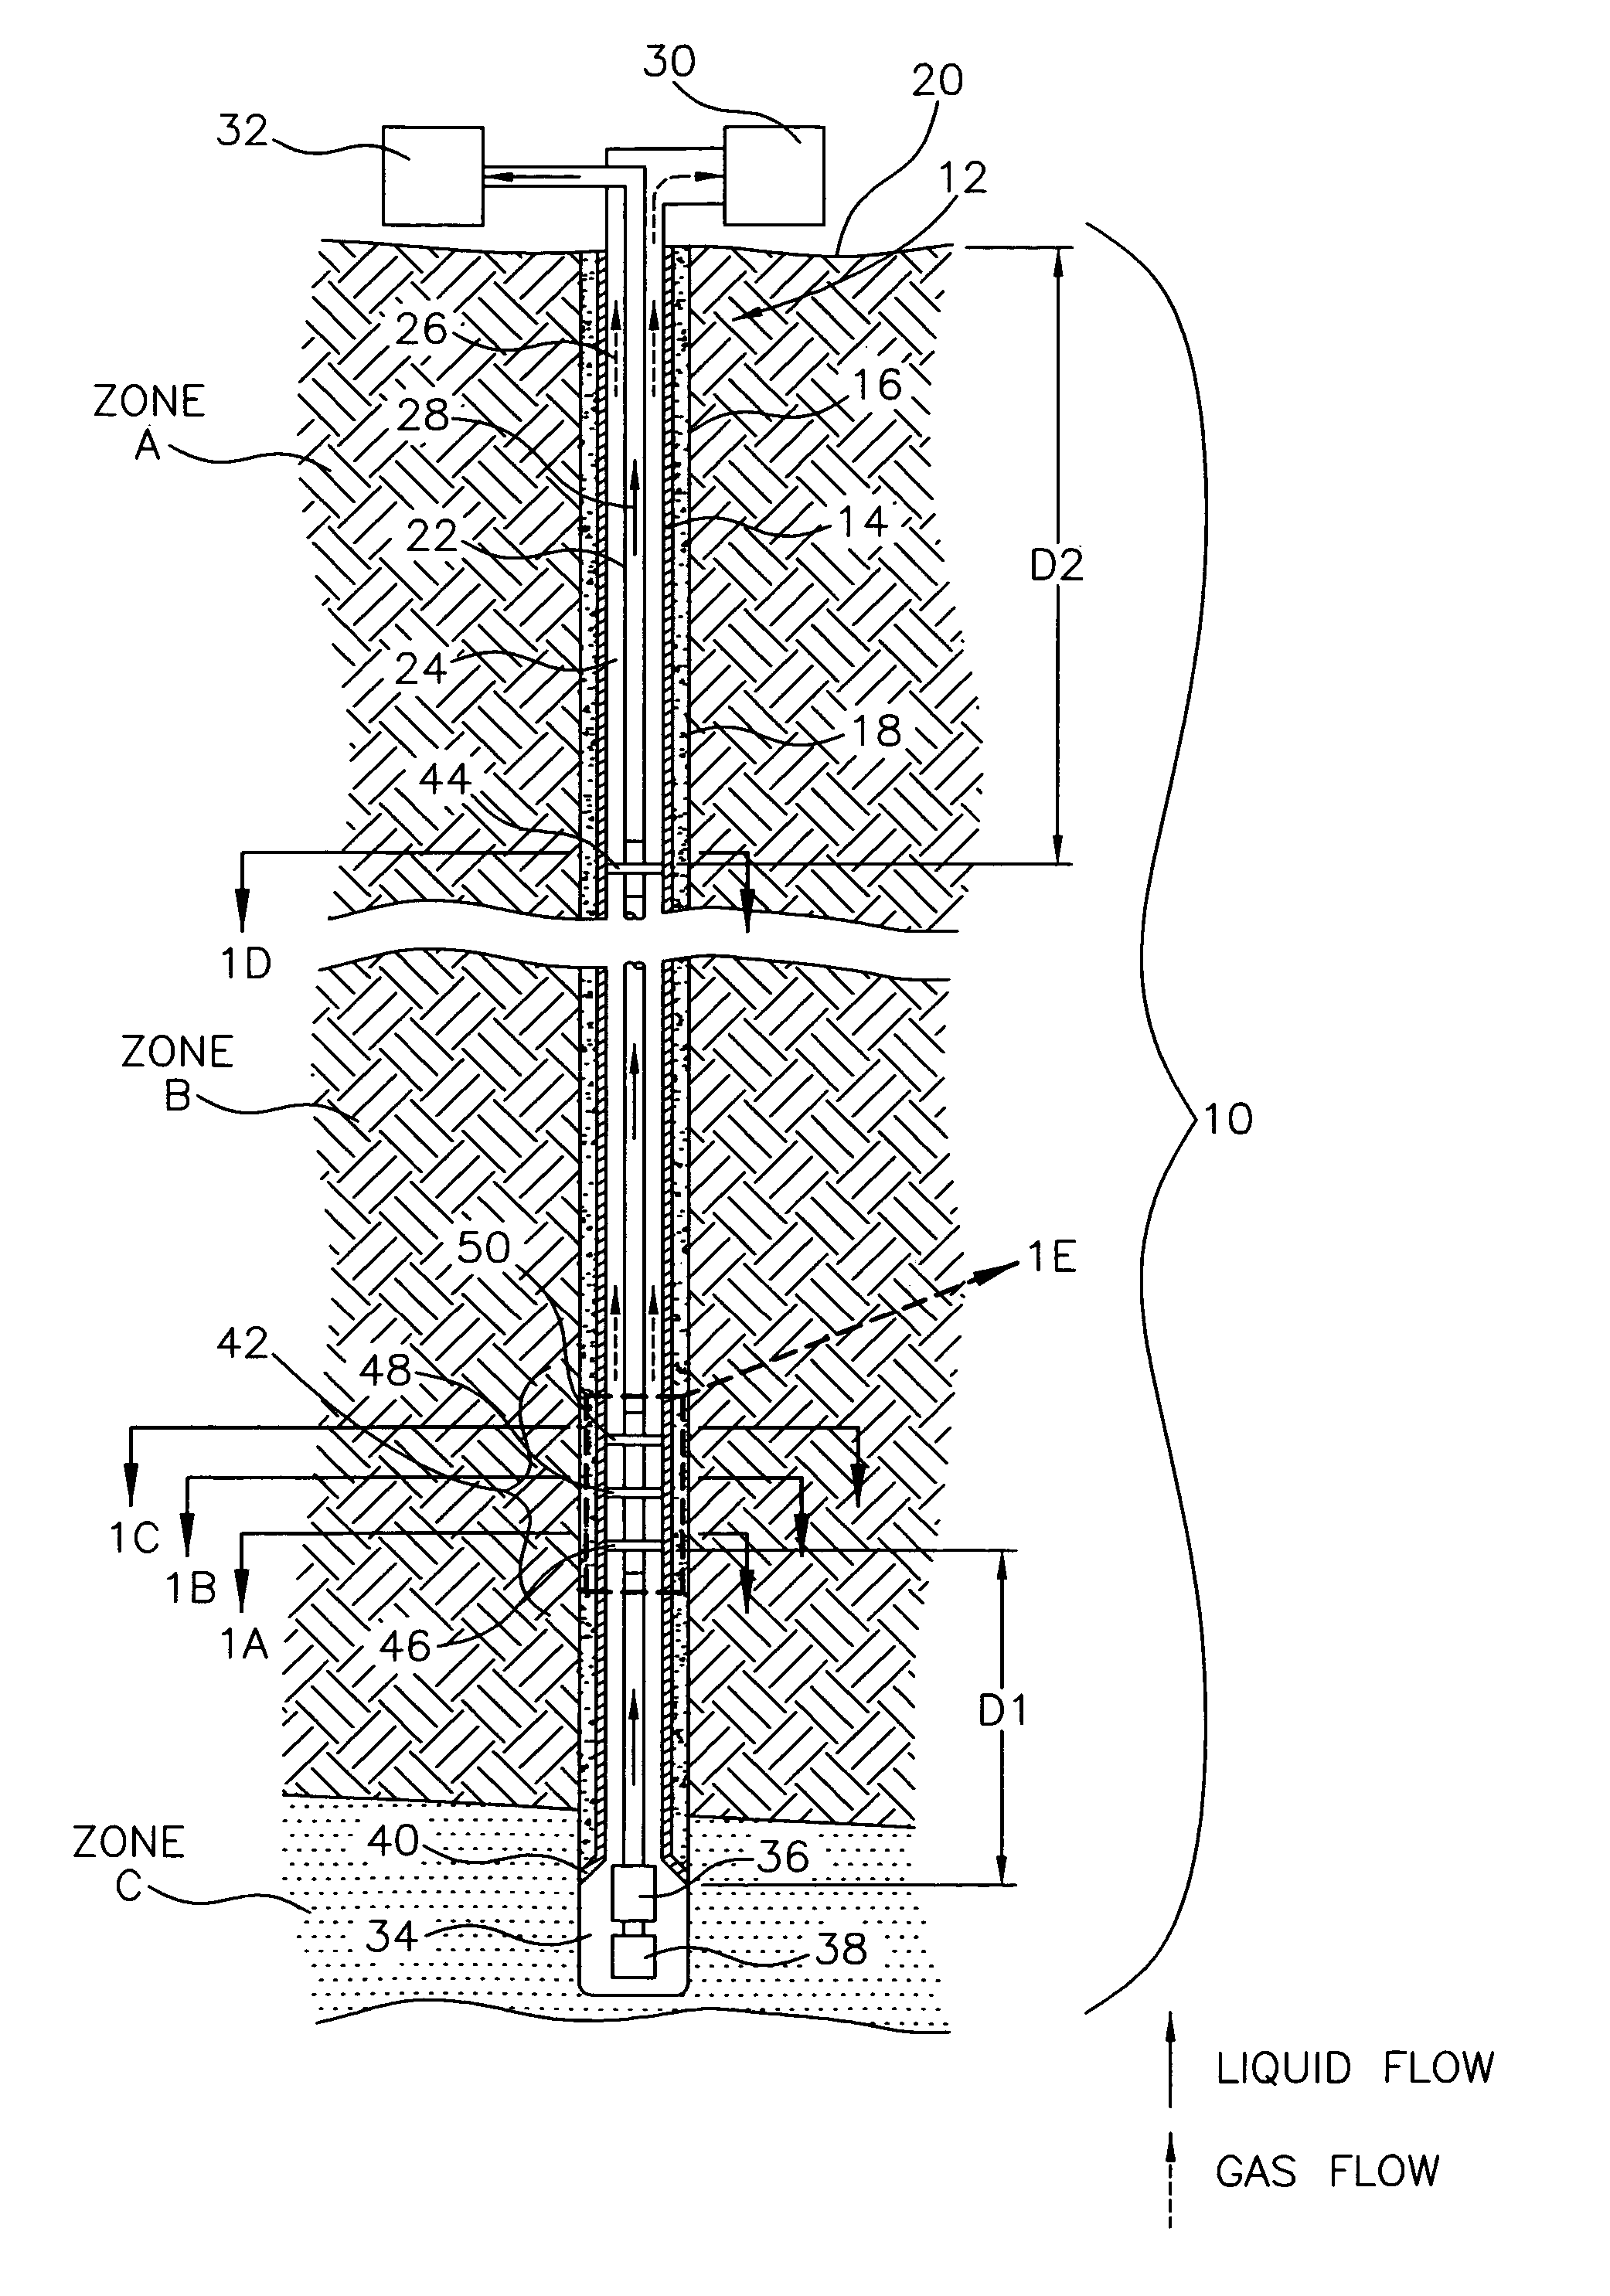 Method and system for producing gas and liquid in a subterranean well